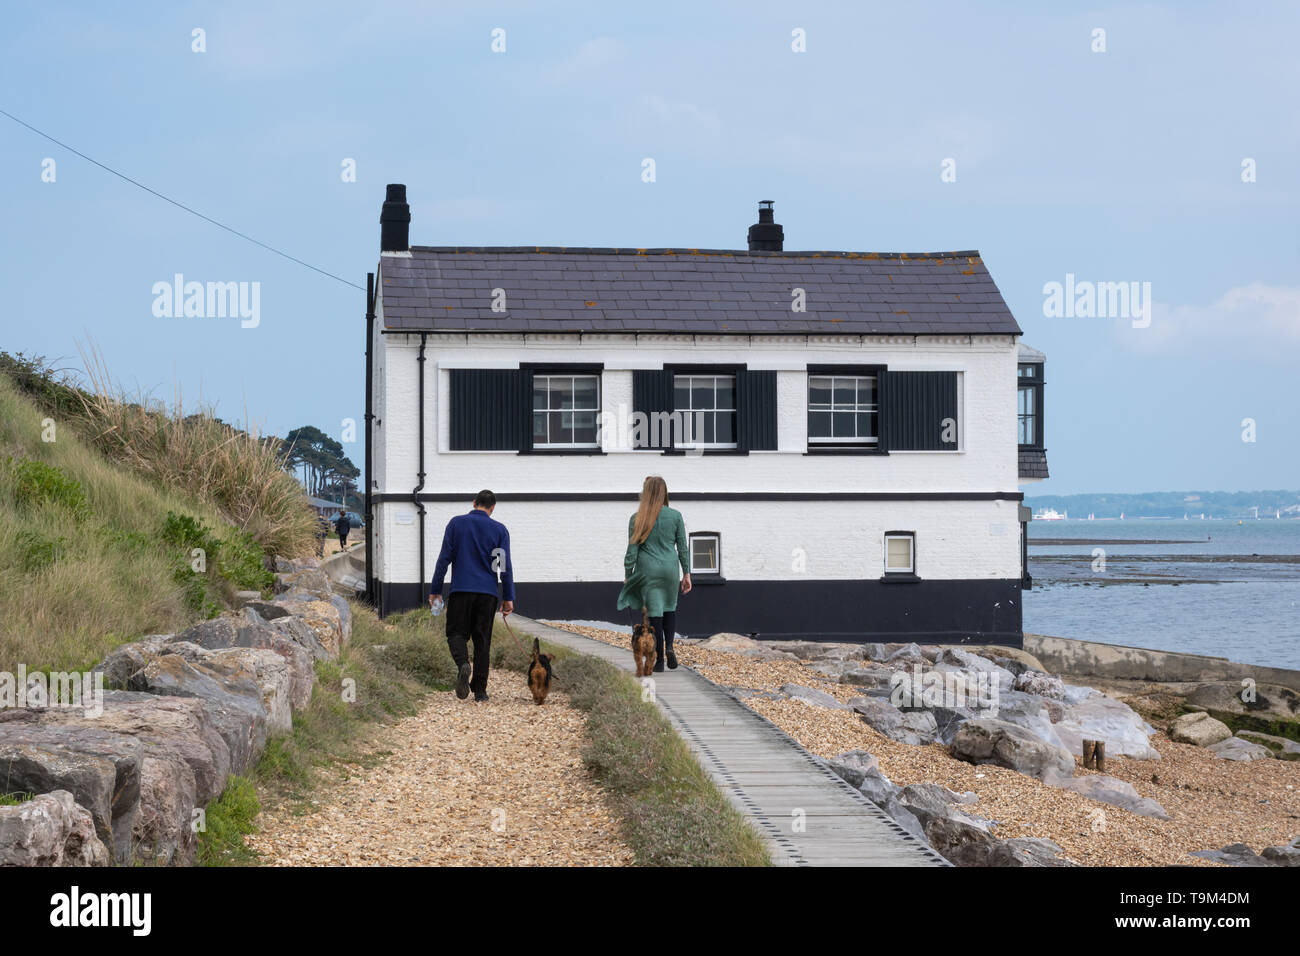 The Watch House built by the coastguard, completed in 1828, on Lepe Beach on the south coast of Hampshire, UK Stock Photo